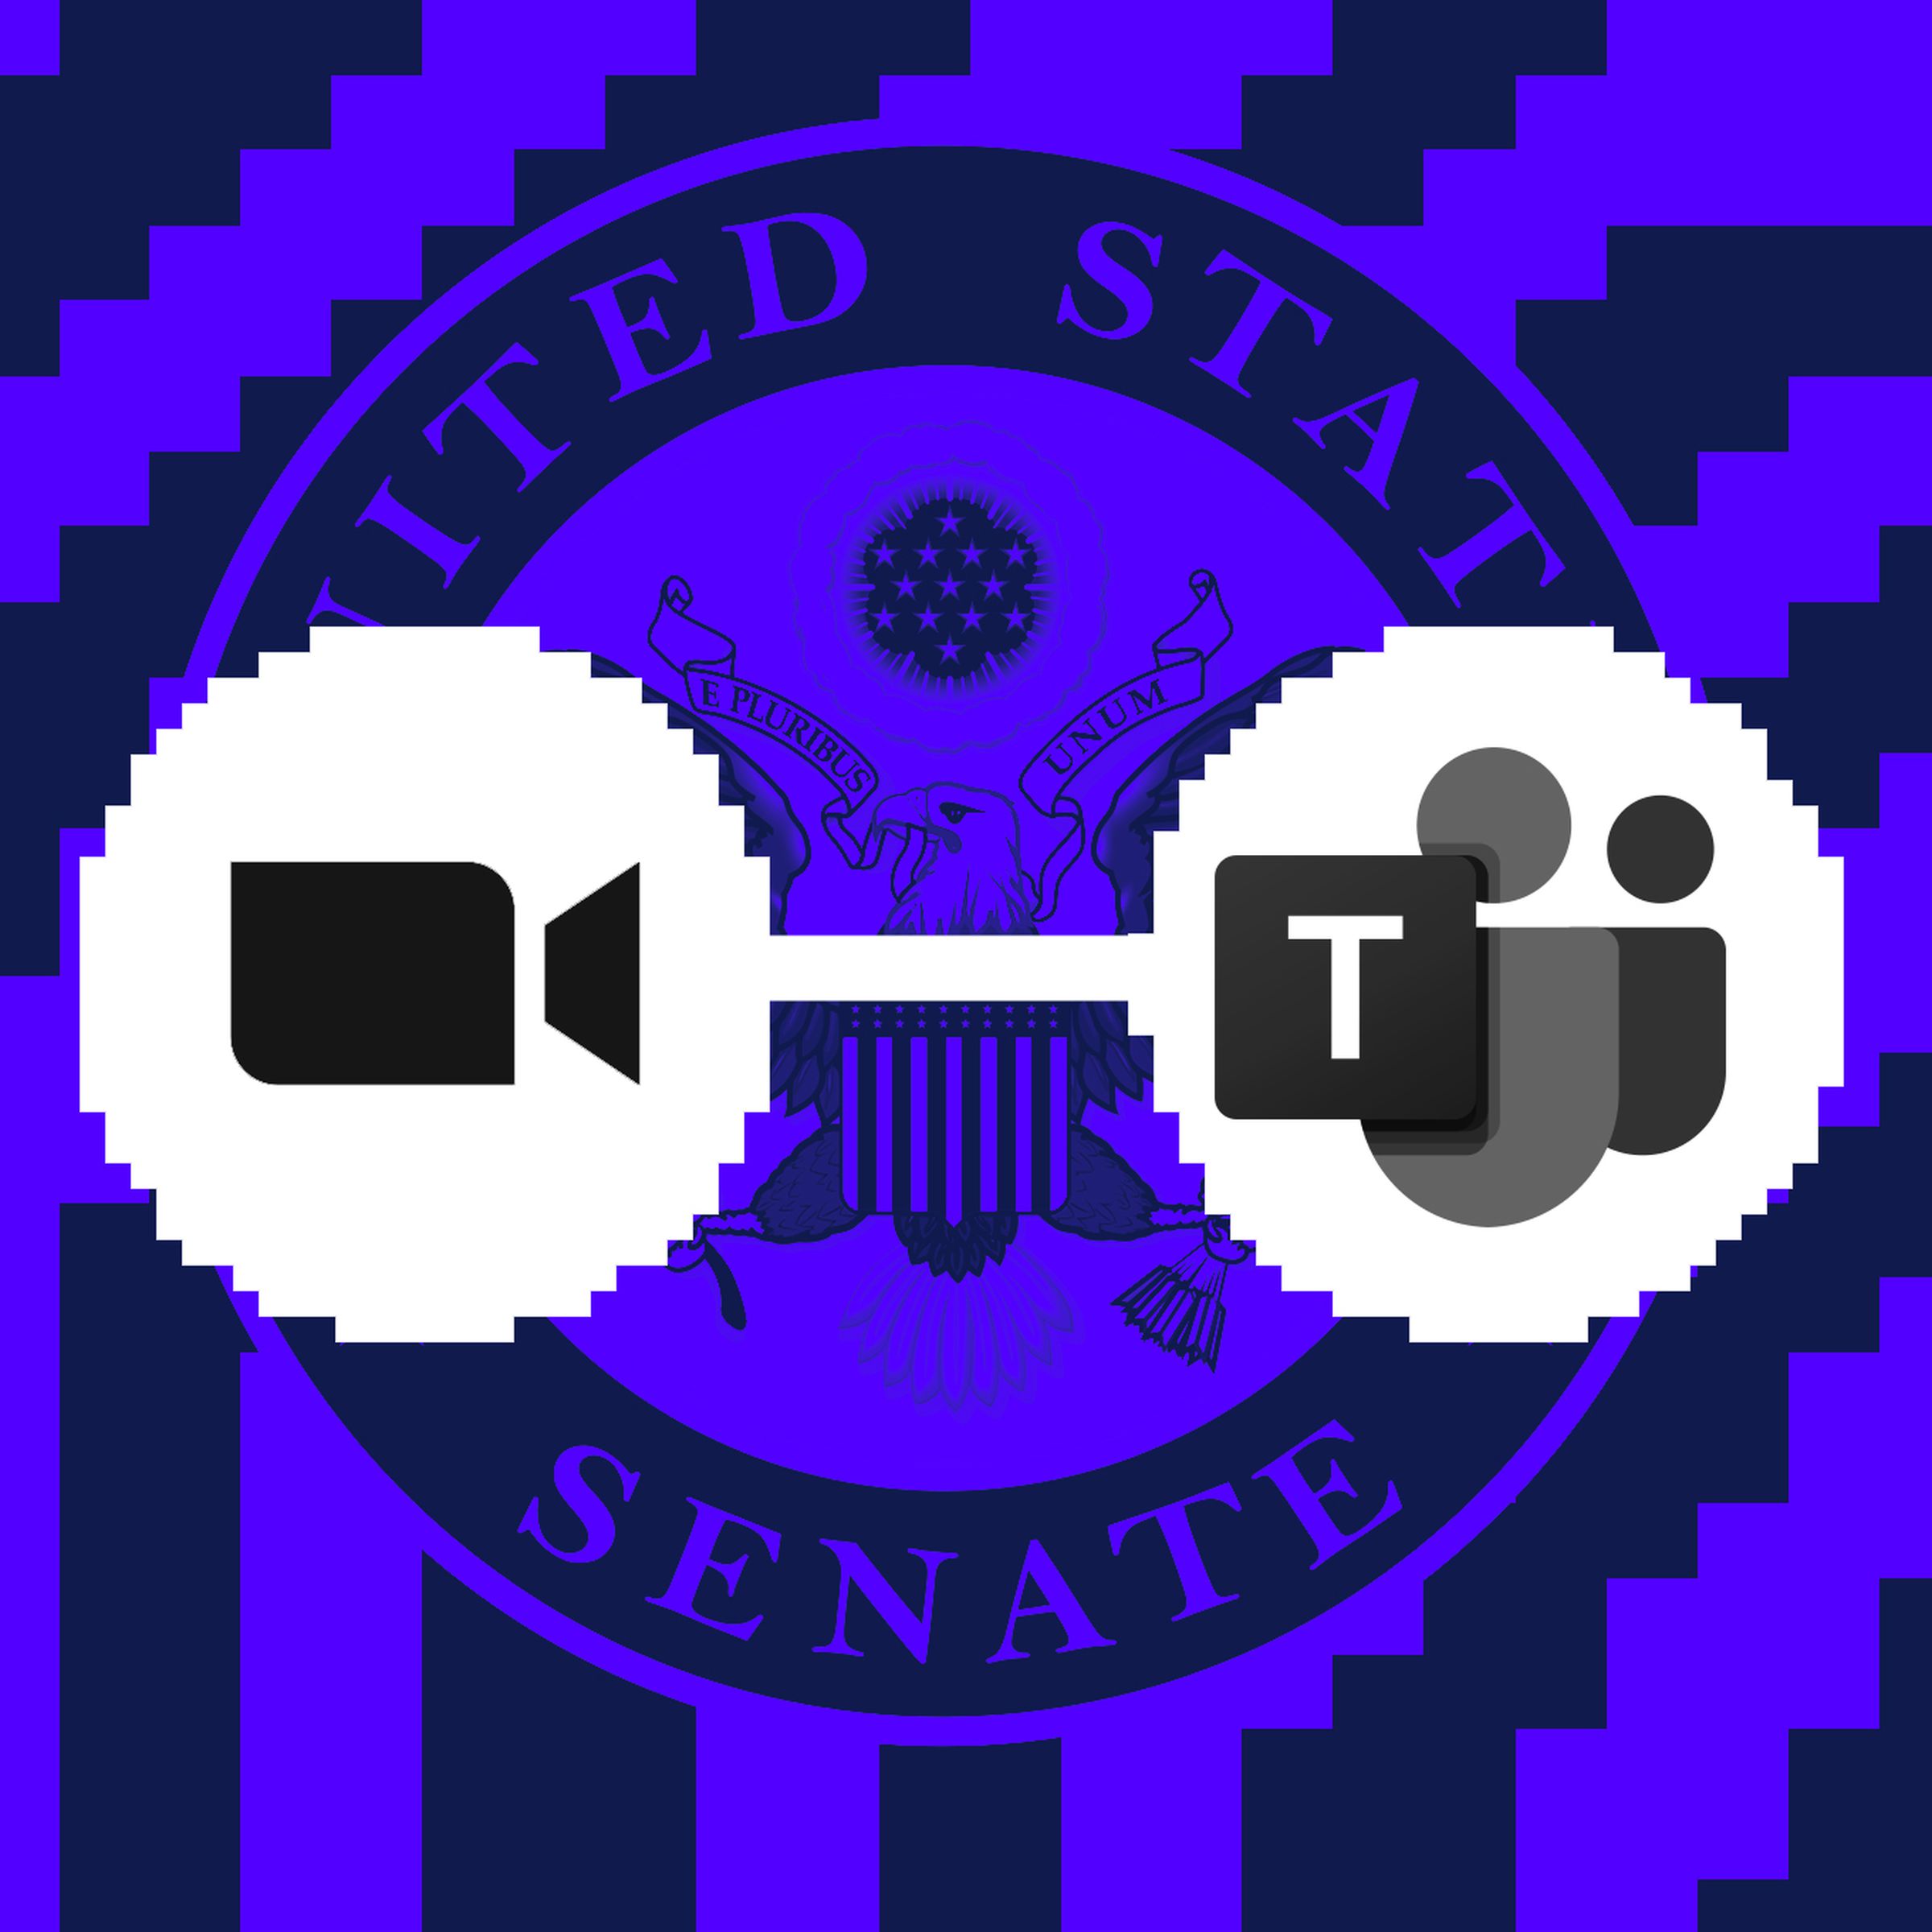 Collage of the Zoom and Teams logos being connected in front of the Senate Seal.